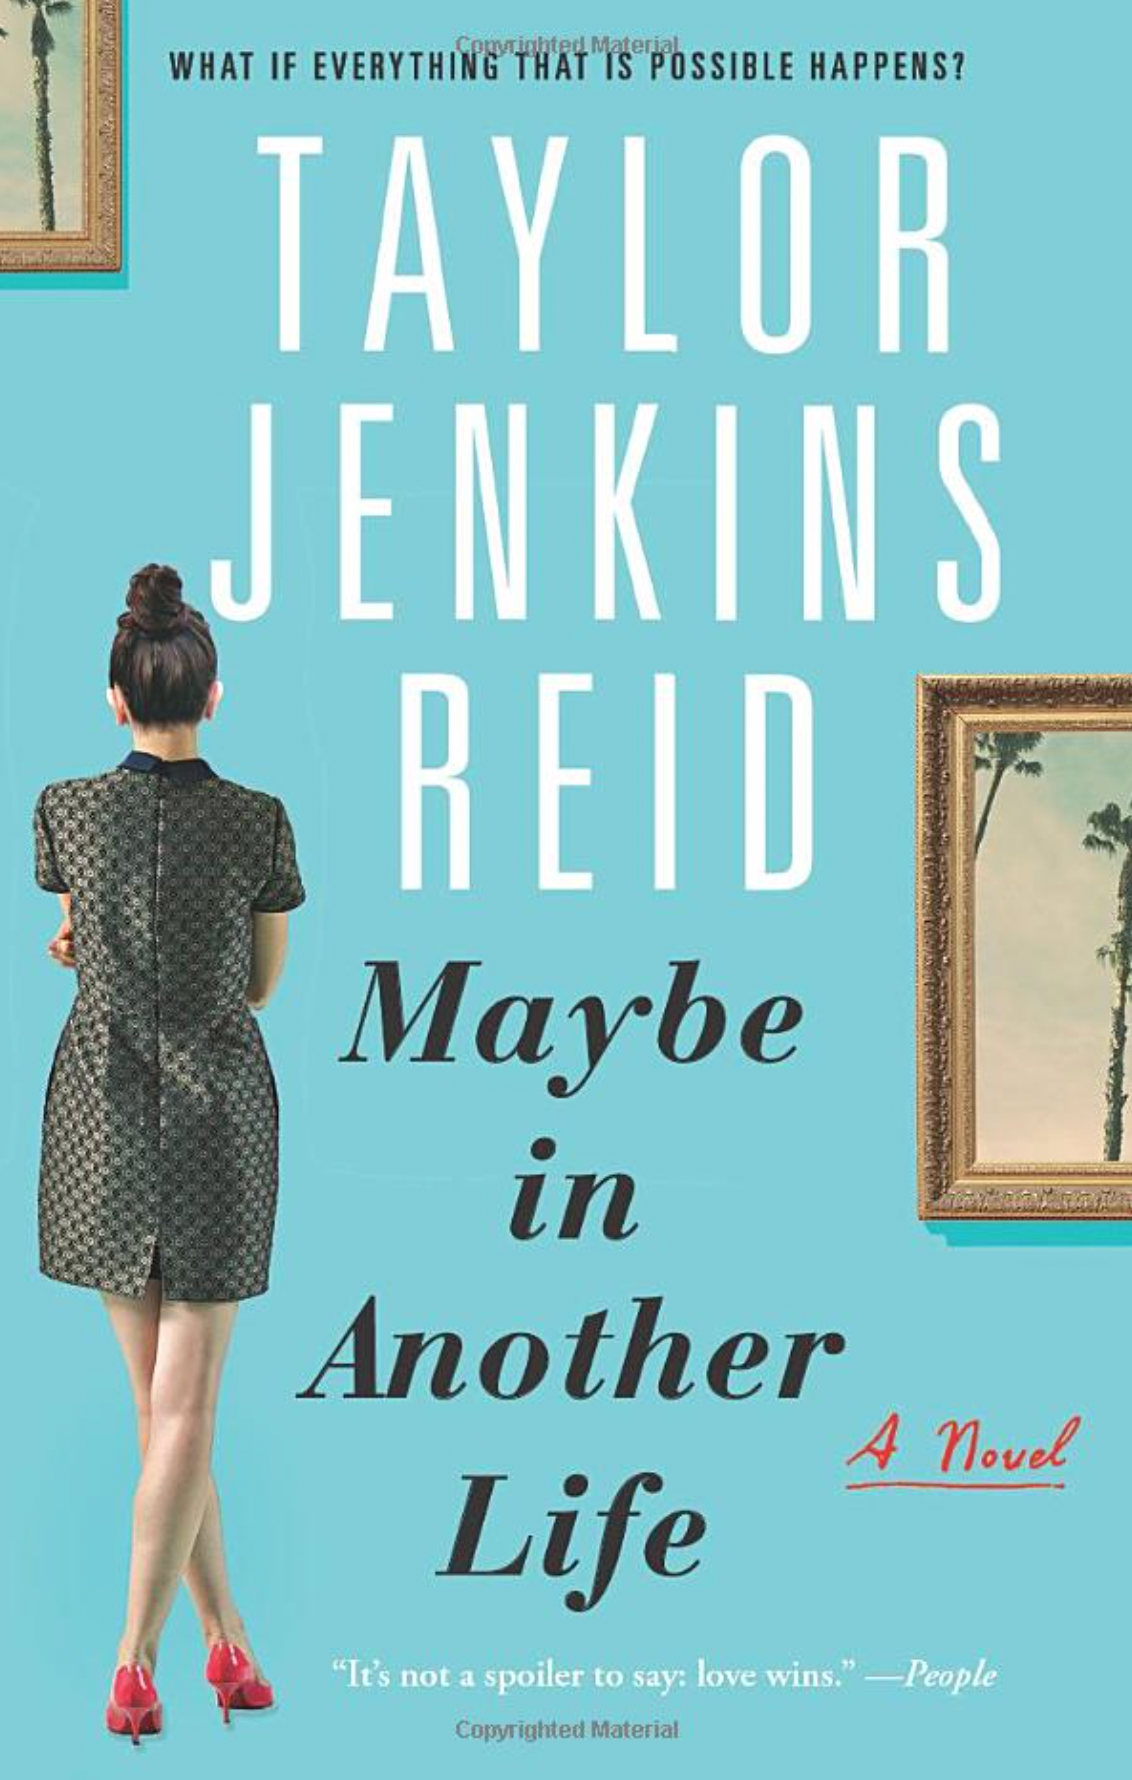 MAYBE IN ANOTHER LIFE NOVEL BY TAYLOR JENKINS REID PAPERBACK